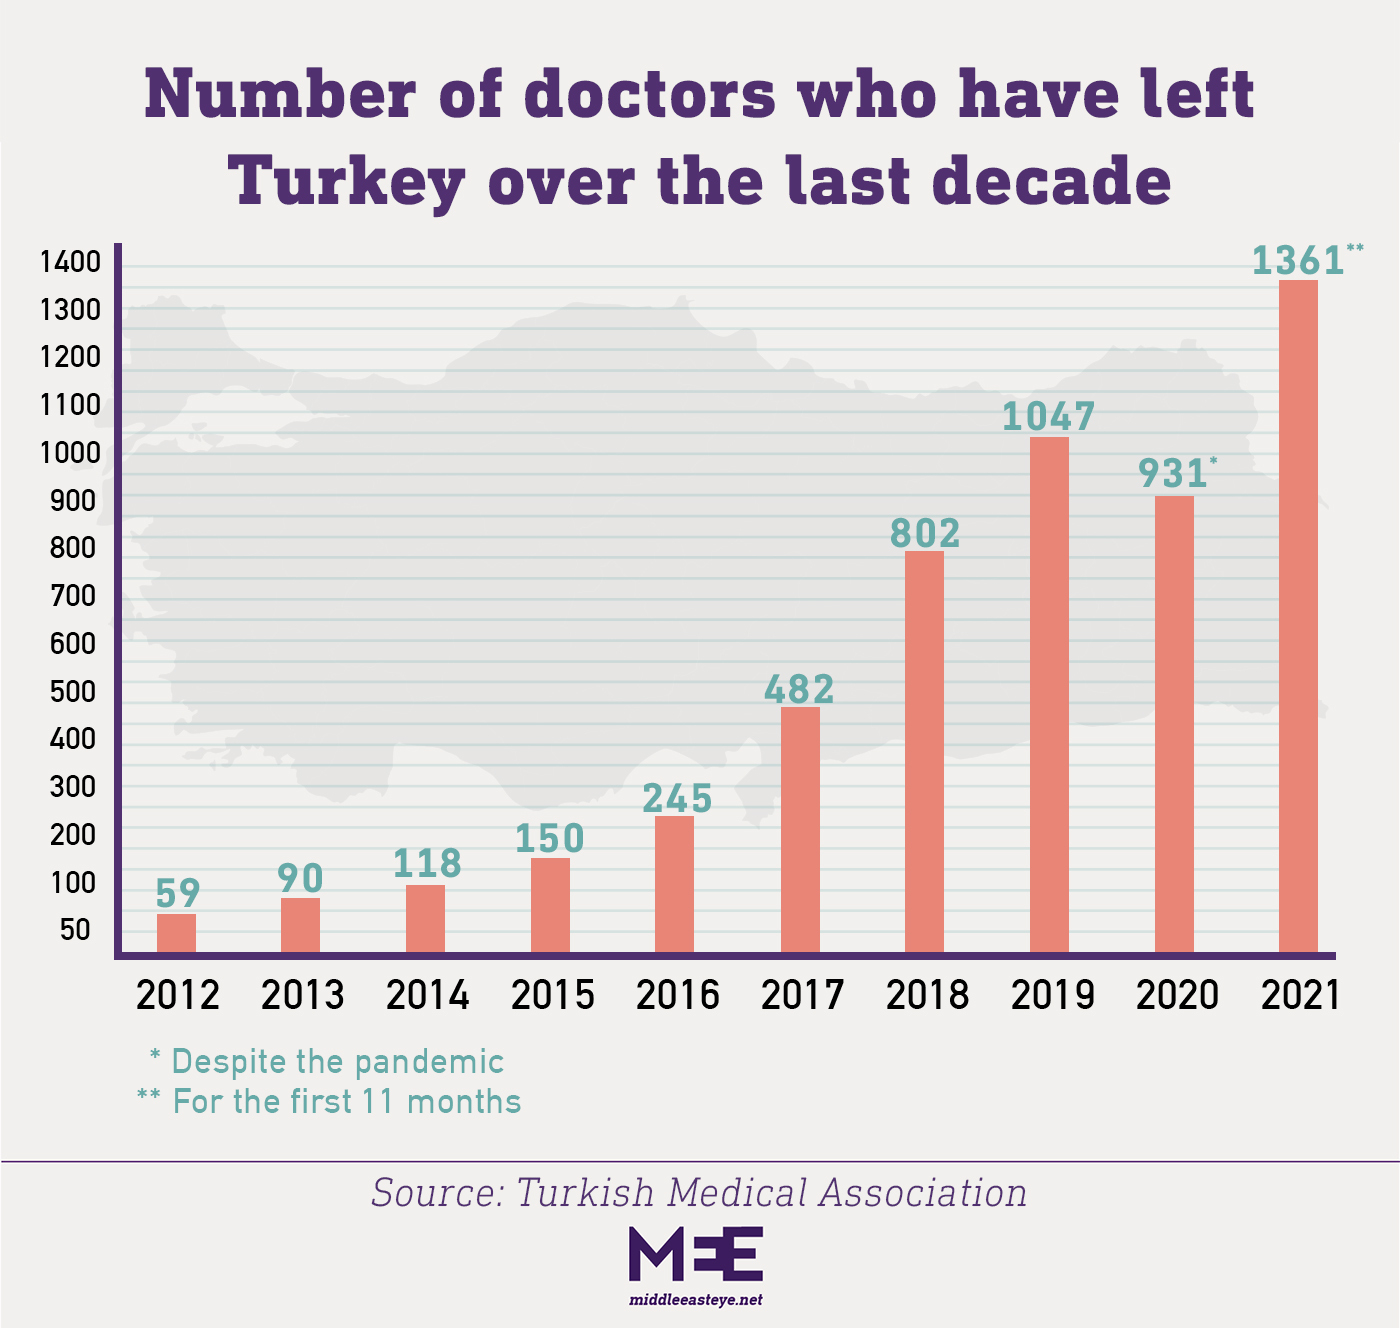 Number of doctors who have left Turkey over the last decade